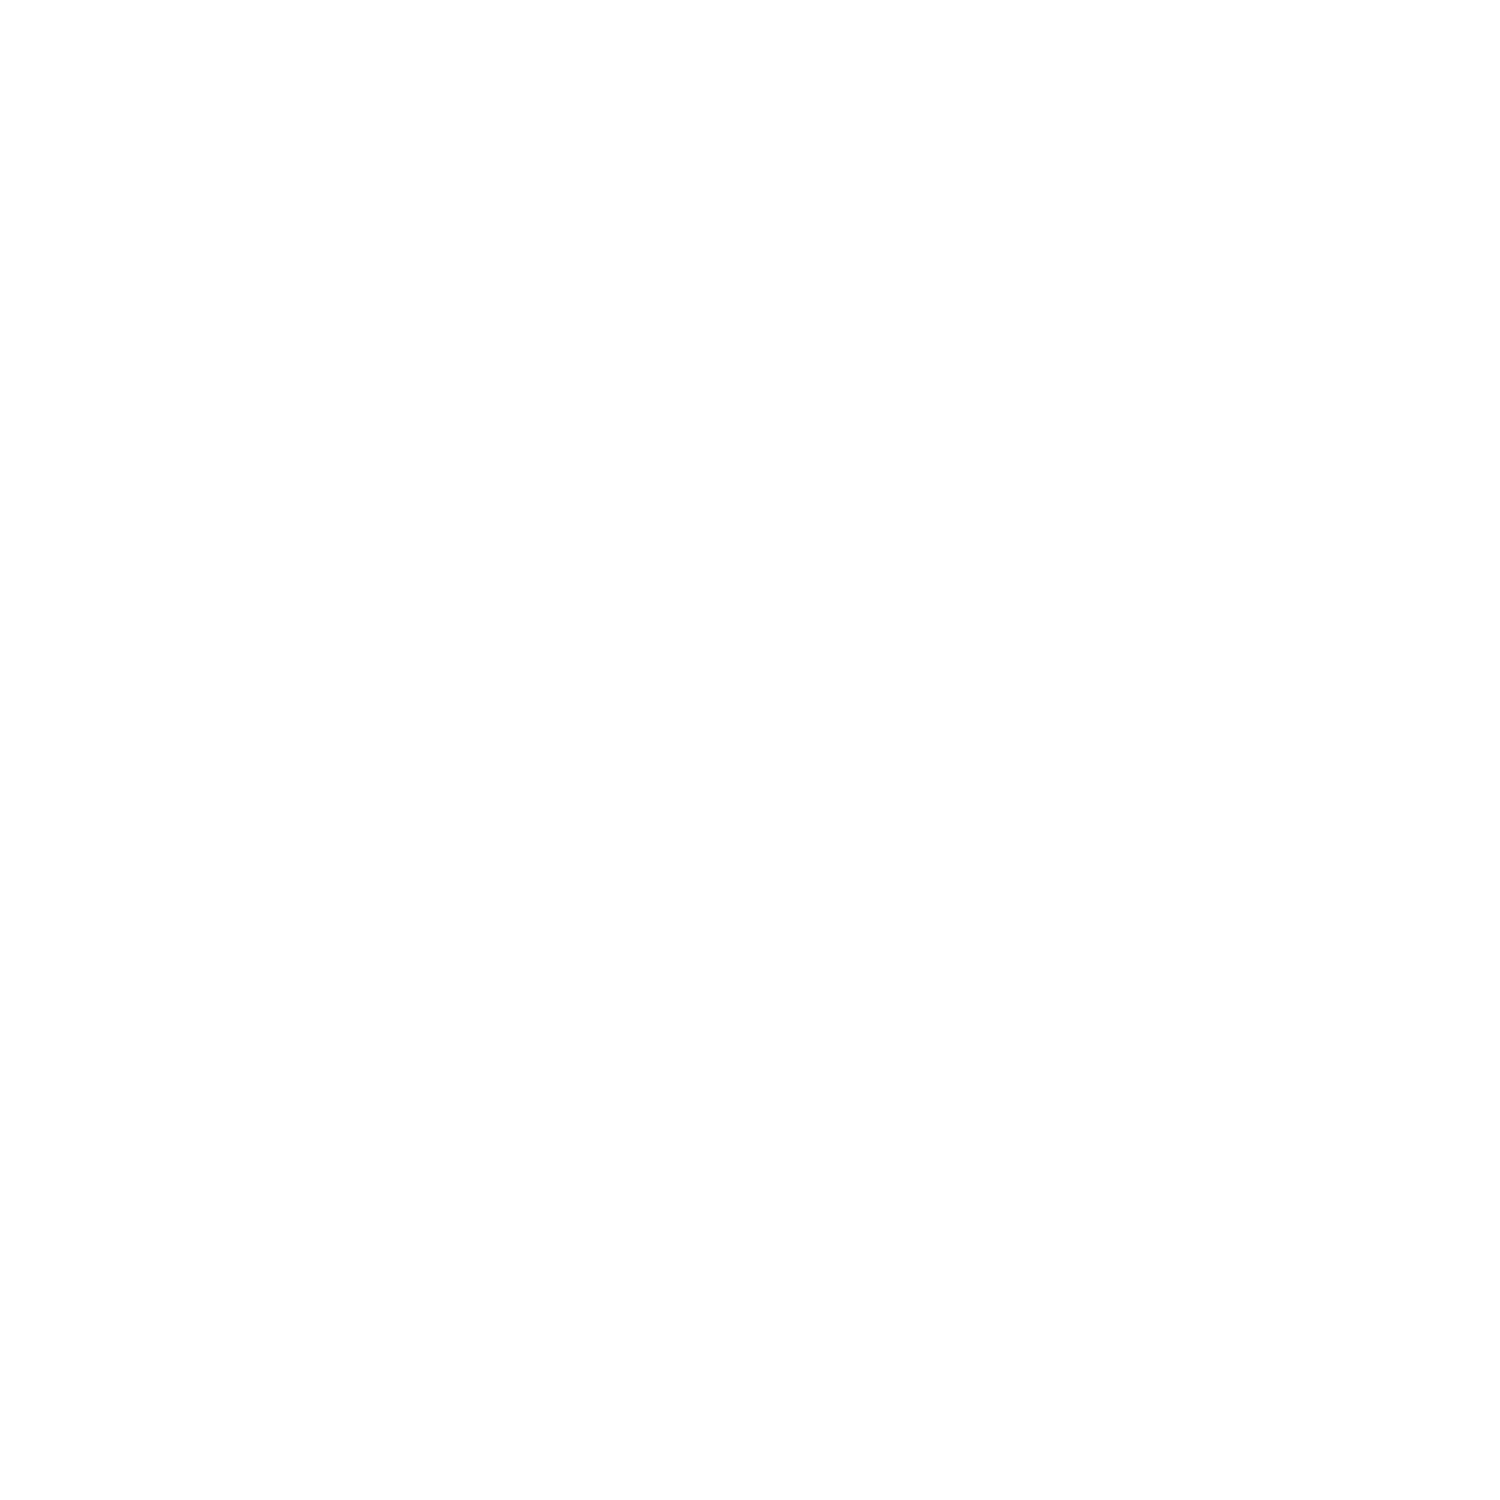 Remap Online is proud to be an Official Agency Partner of Sprout Social (white and red badge)